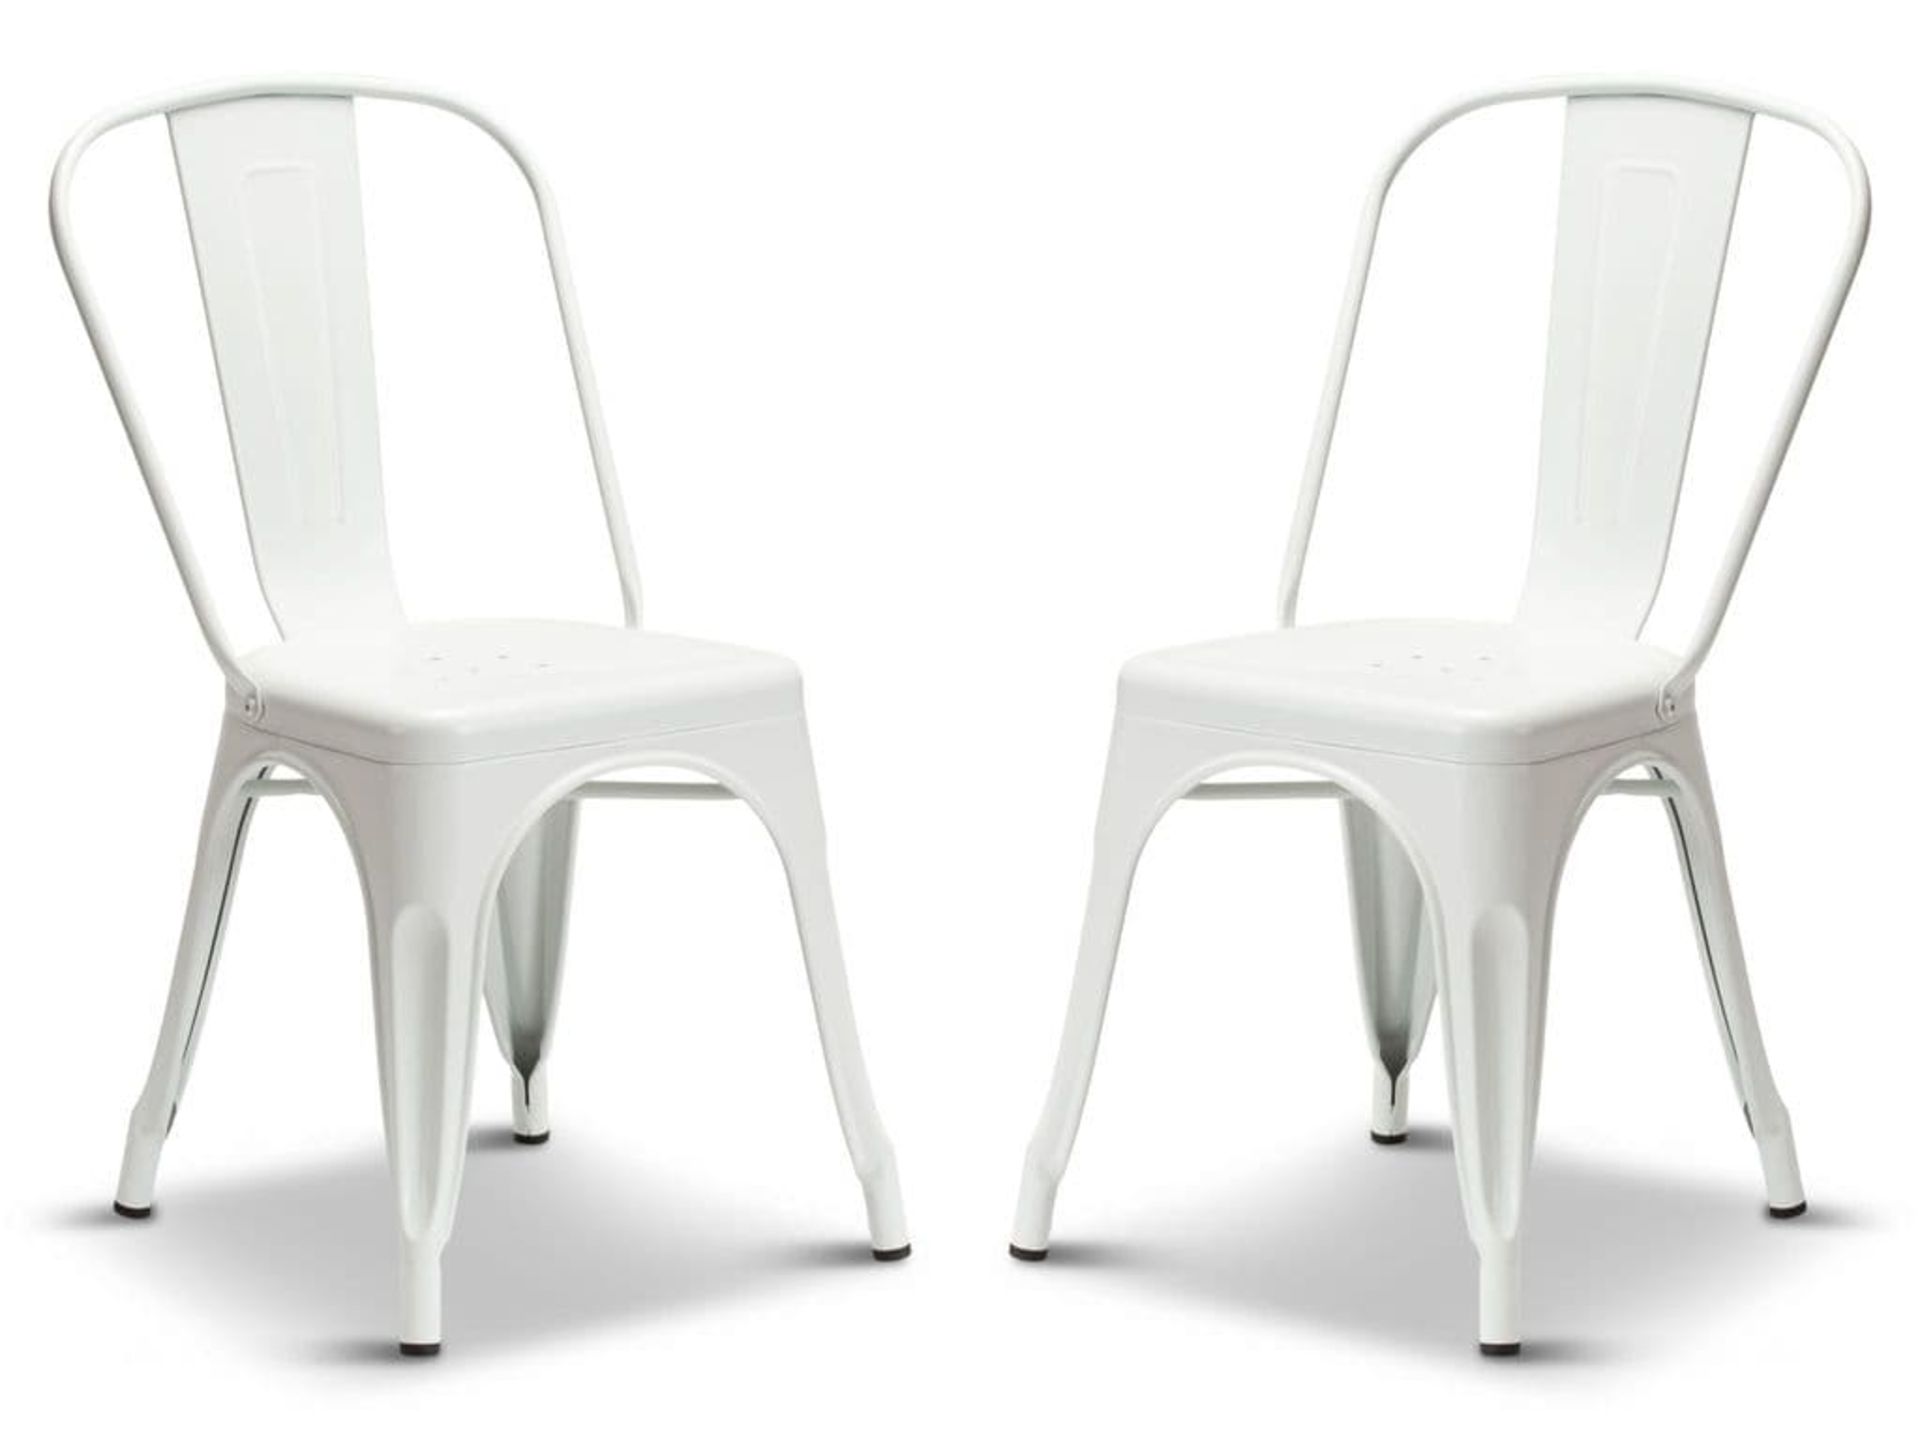 1 x Tolix Industrial Style Outdoor Bistro Table and Chair Set in White- Includes 1 x Table and 4 x - Image 6 of 14